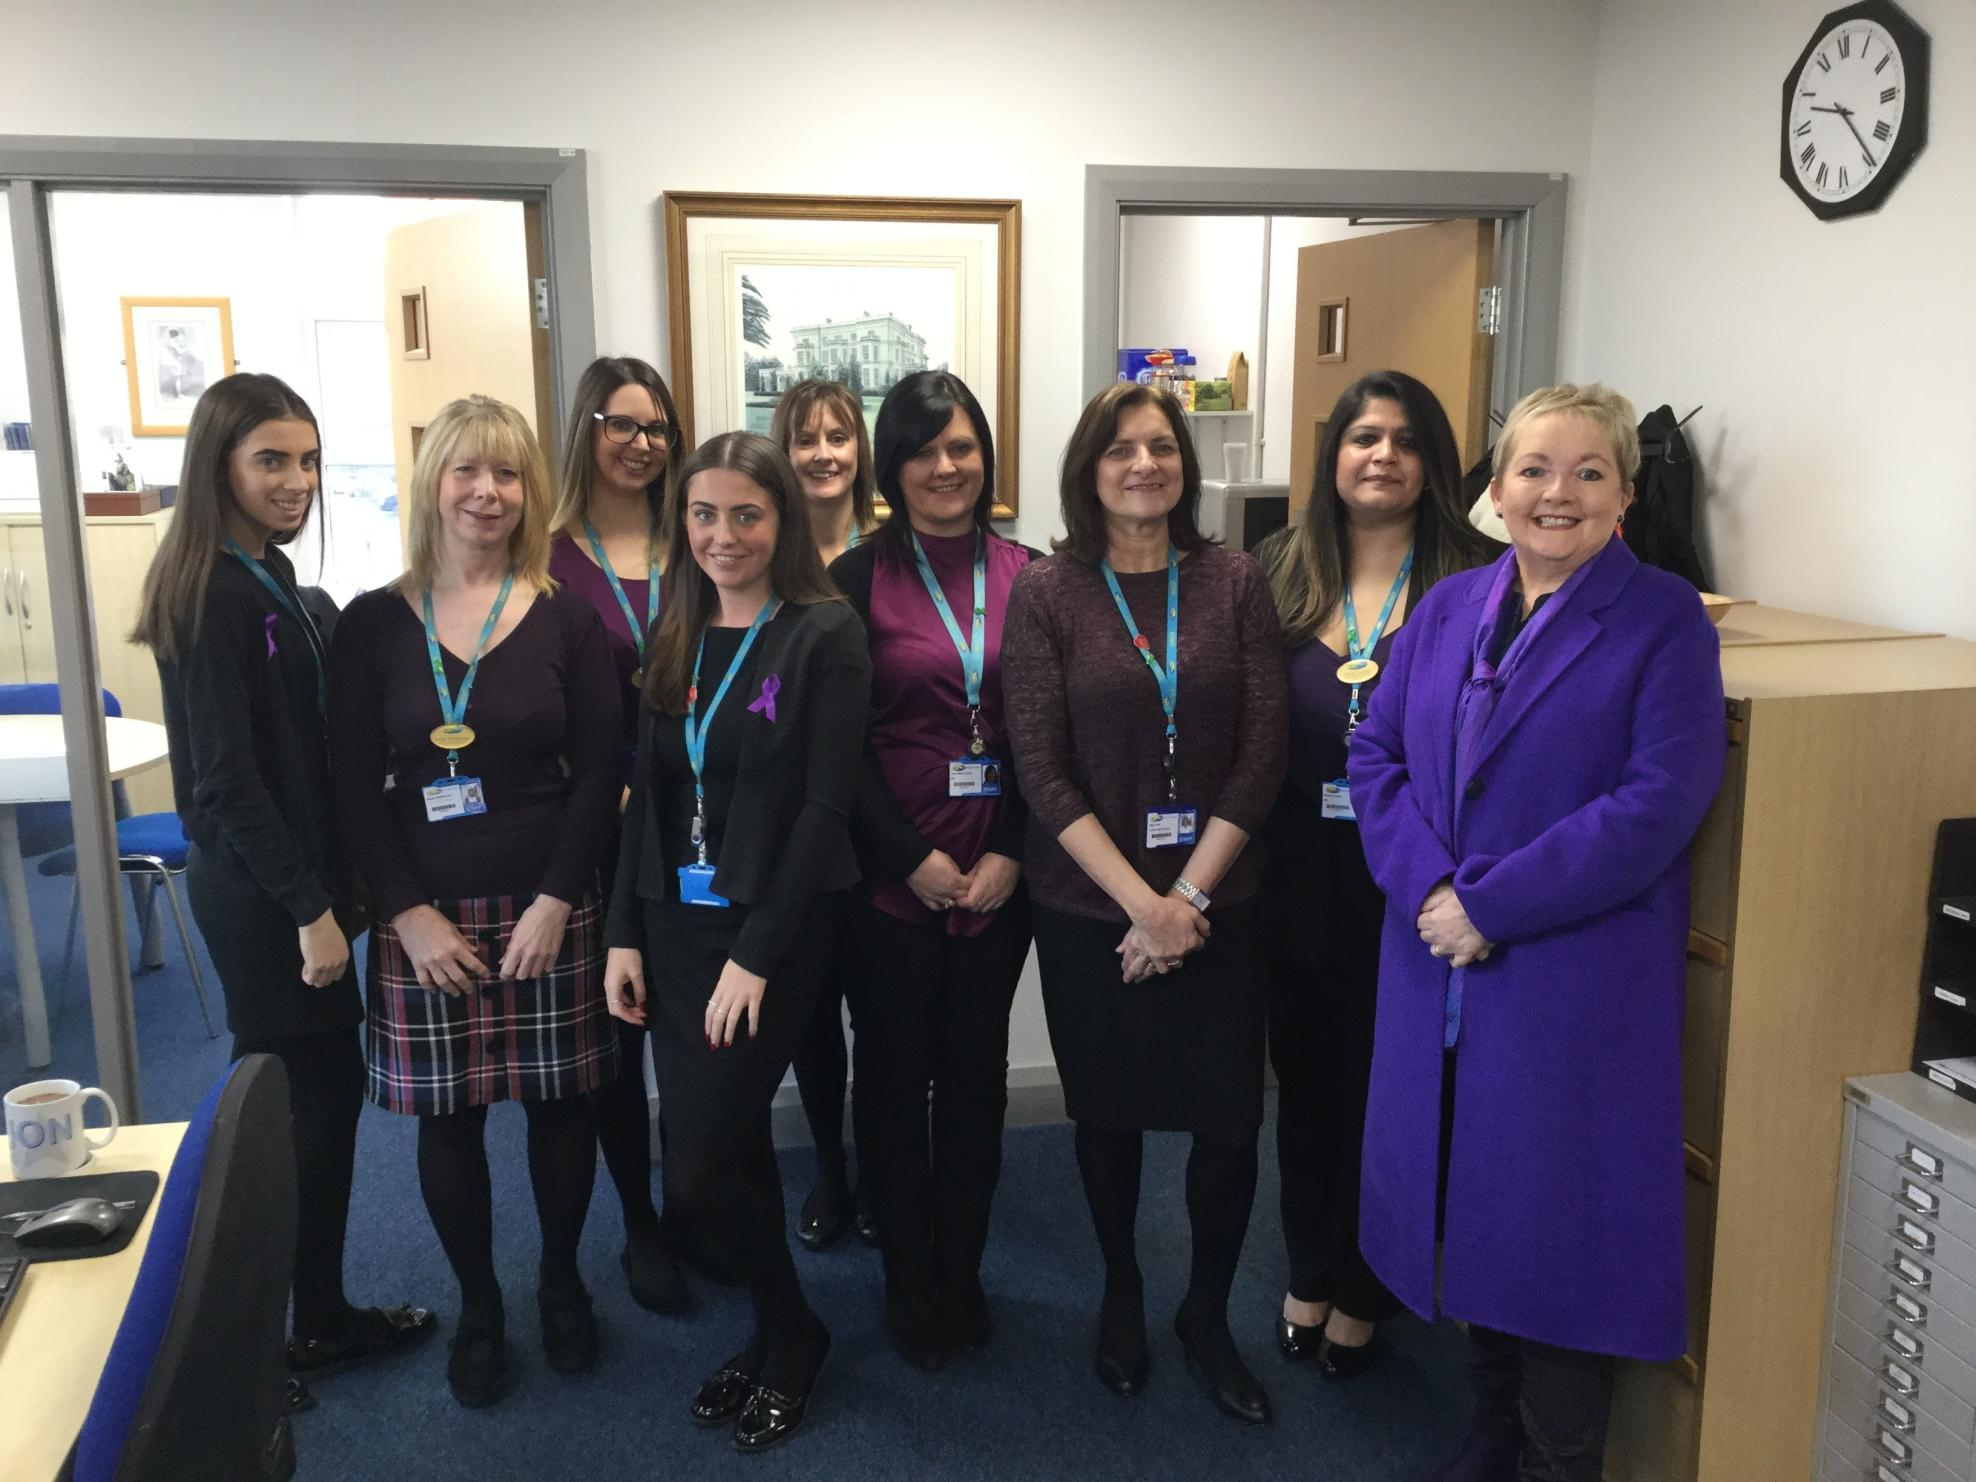 Nine Wirral Met College staff members stood in an office wearing purple clothing to support International Day for Persons with Disabilities